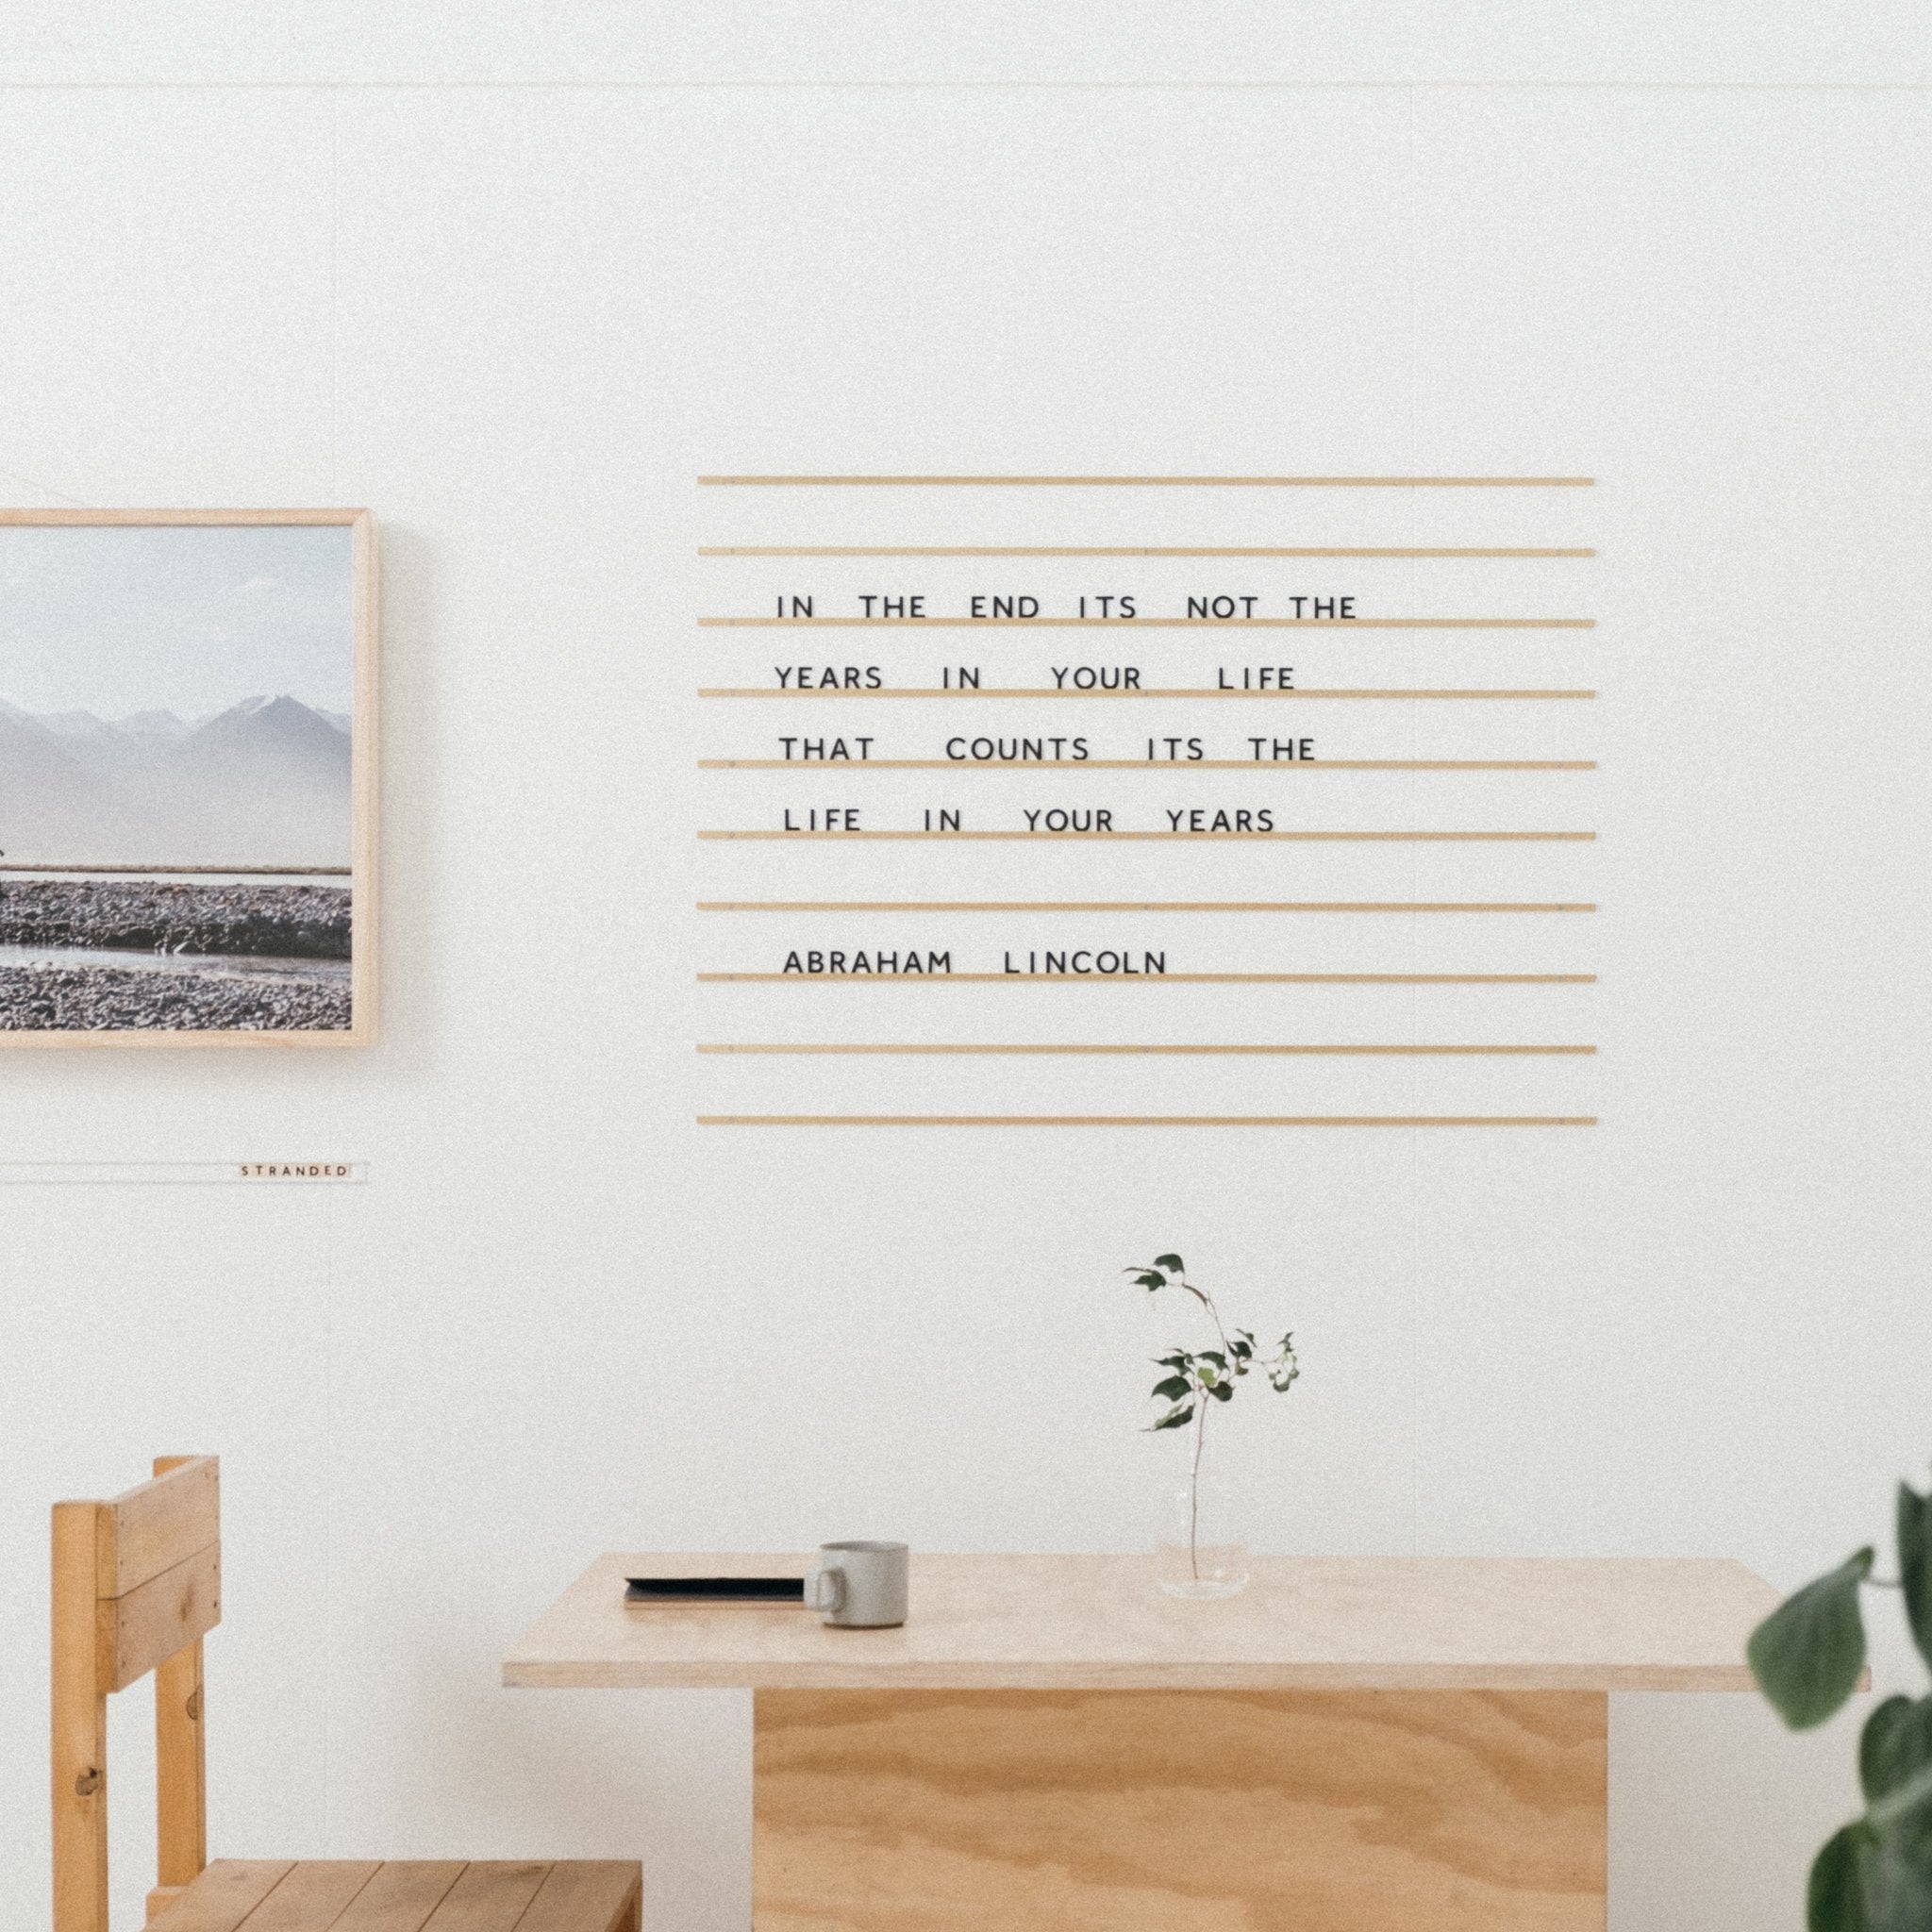 4 Ways to Use the Atelier Letter Board - George & Willy EU